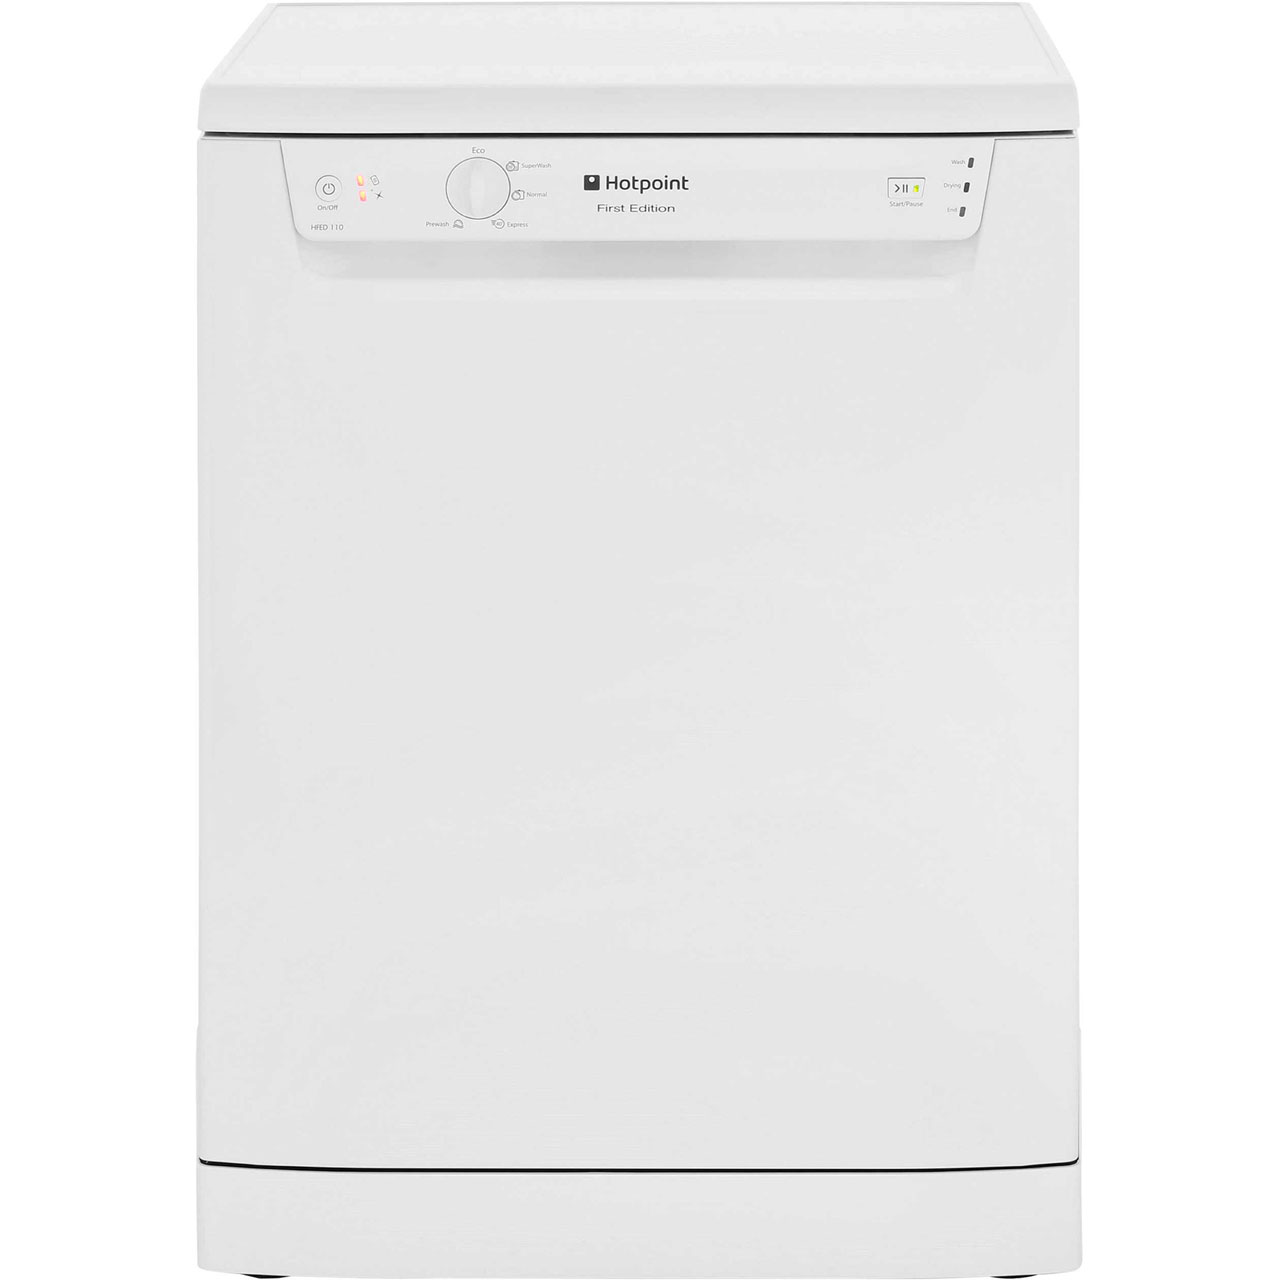 Hotpoint First Edition HFED110P Free Standing Dishwasher in White